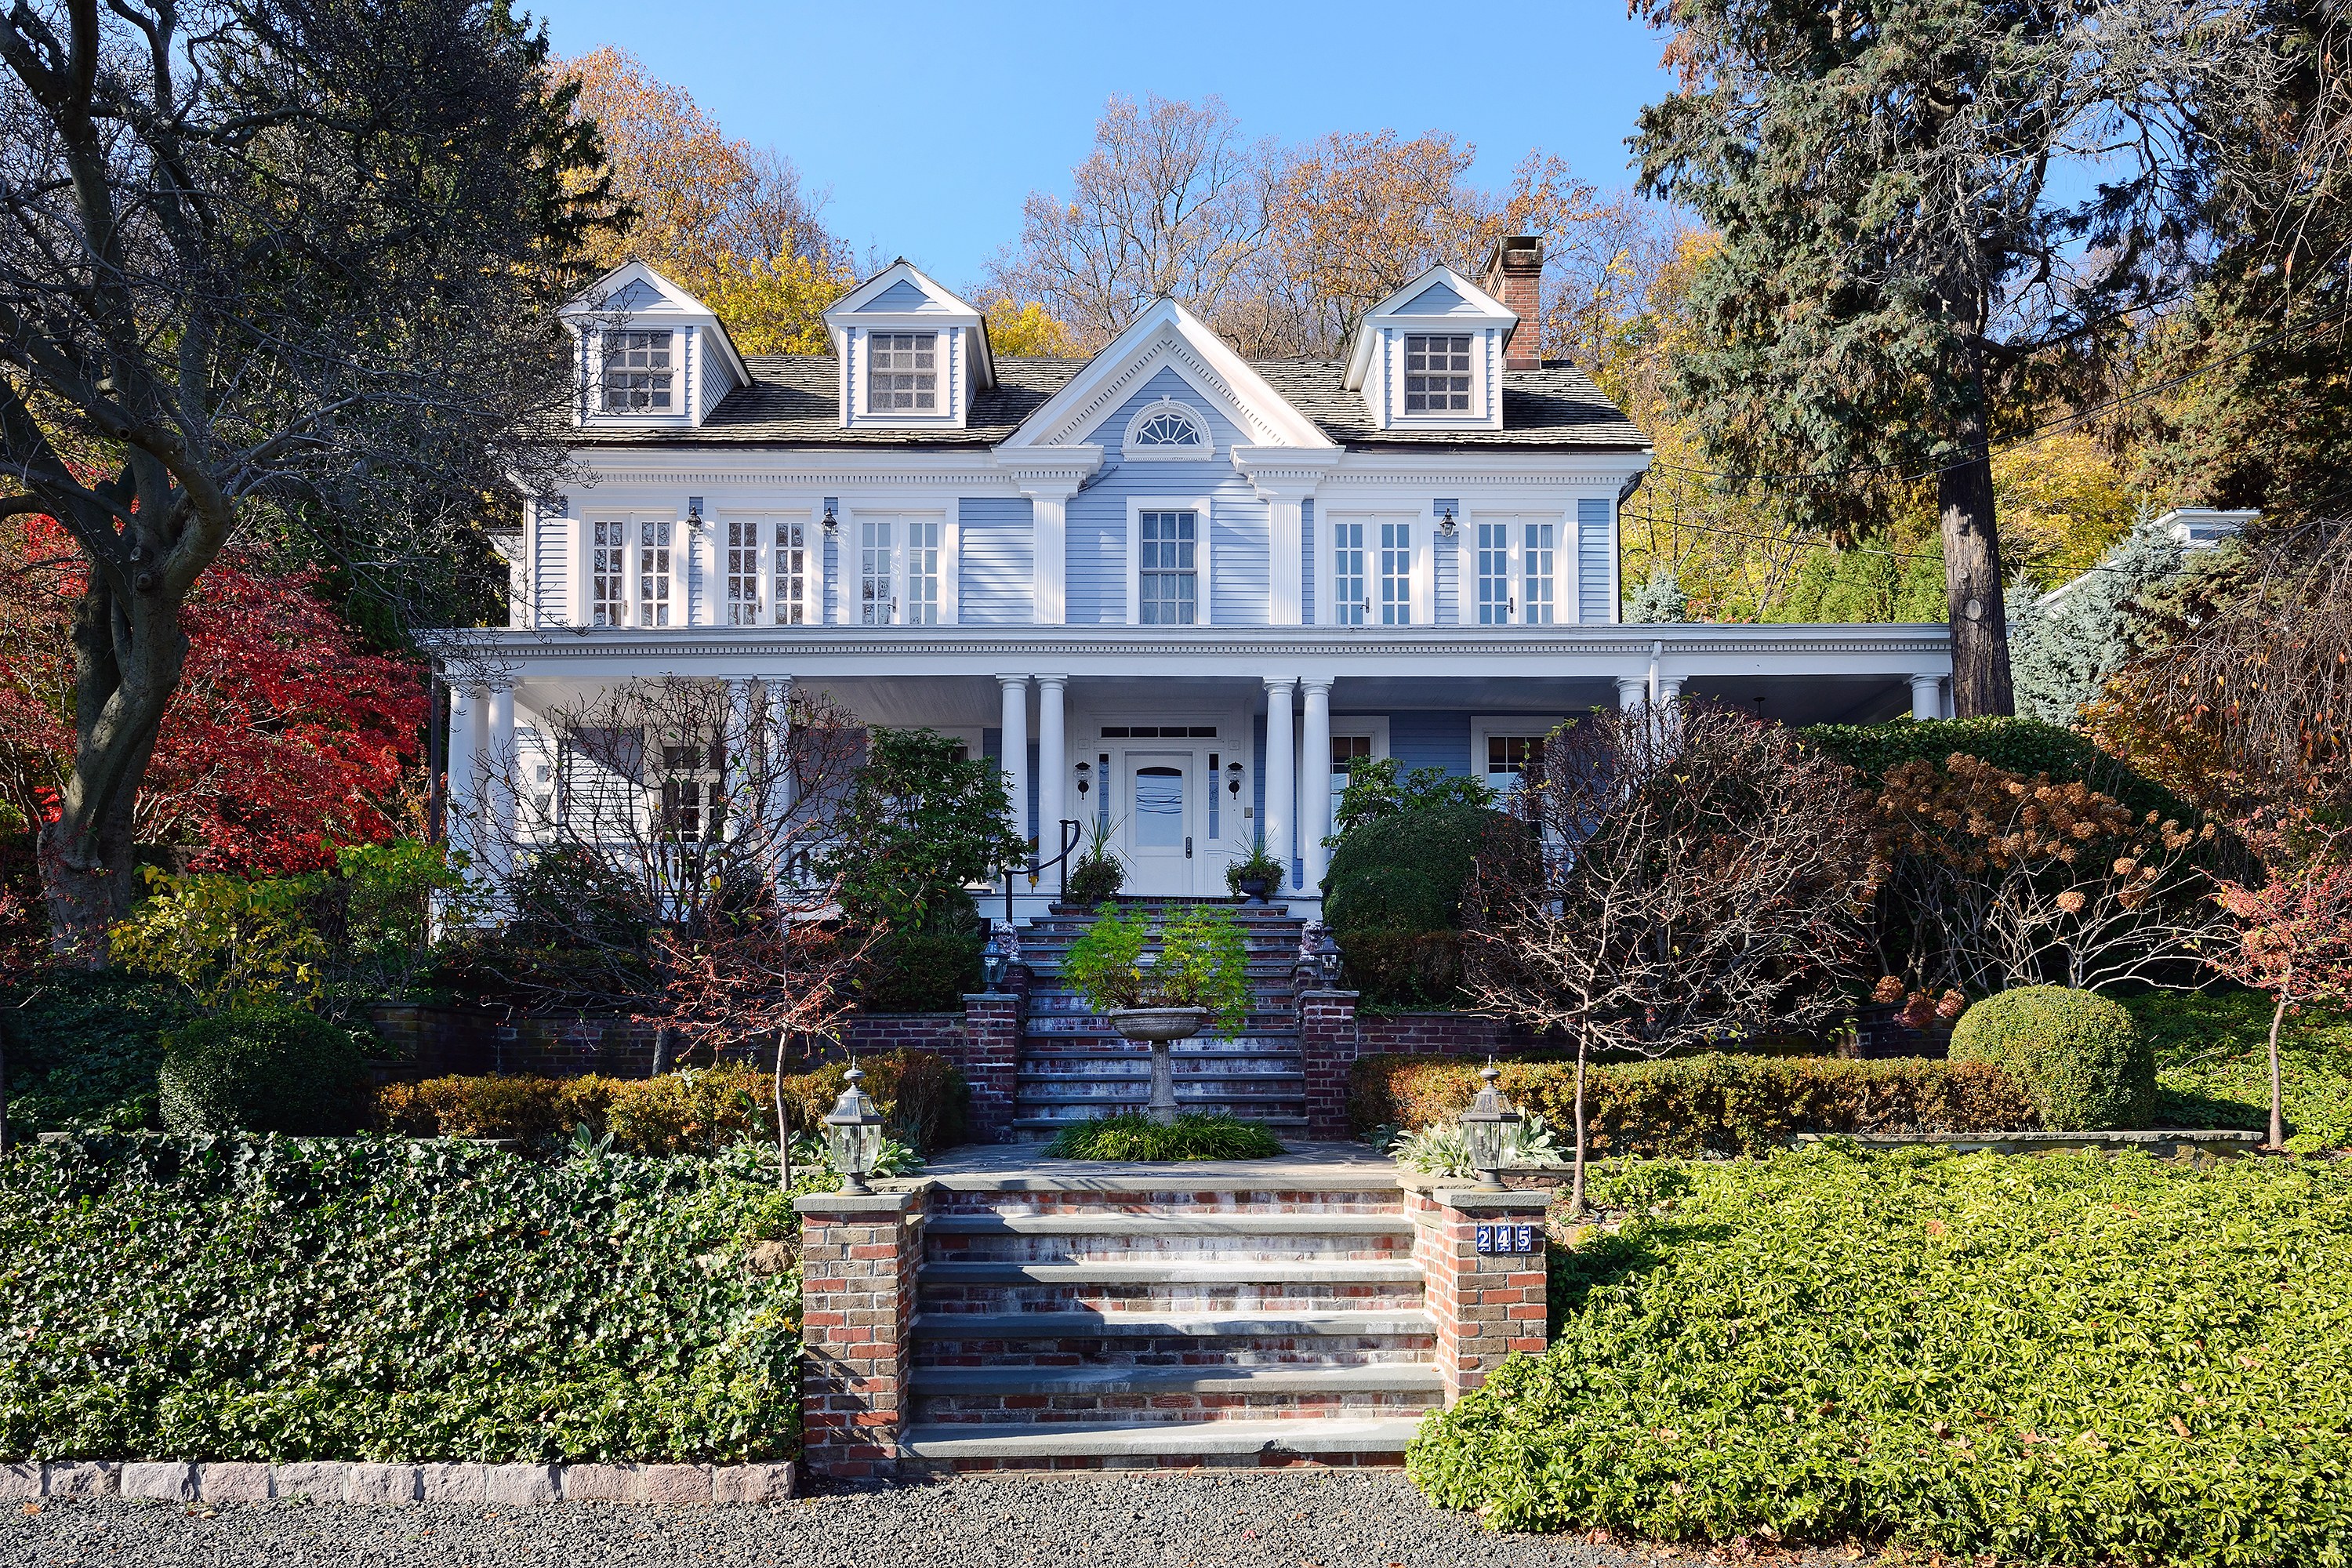 Greek Revival Home for Sale in Grandview, New York | Architectural ...